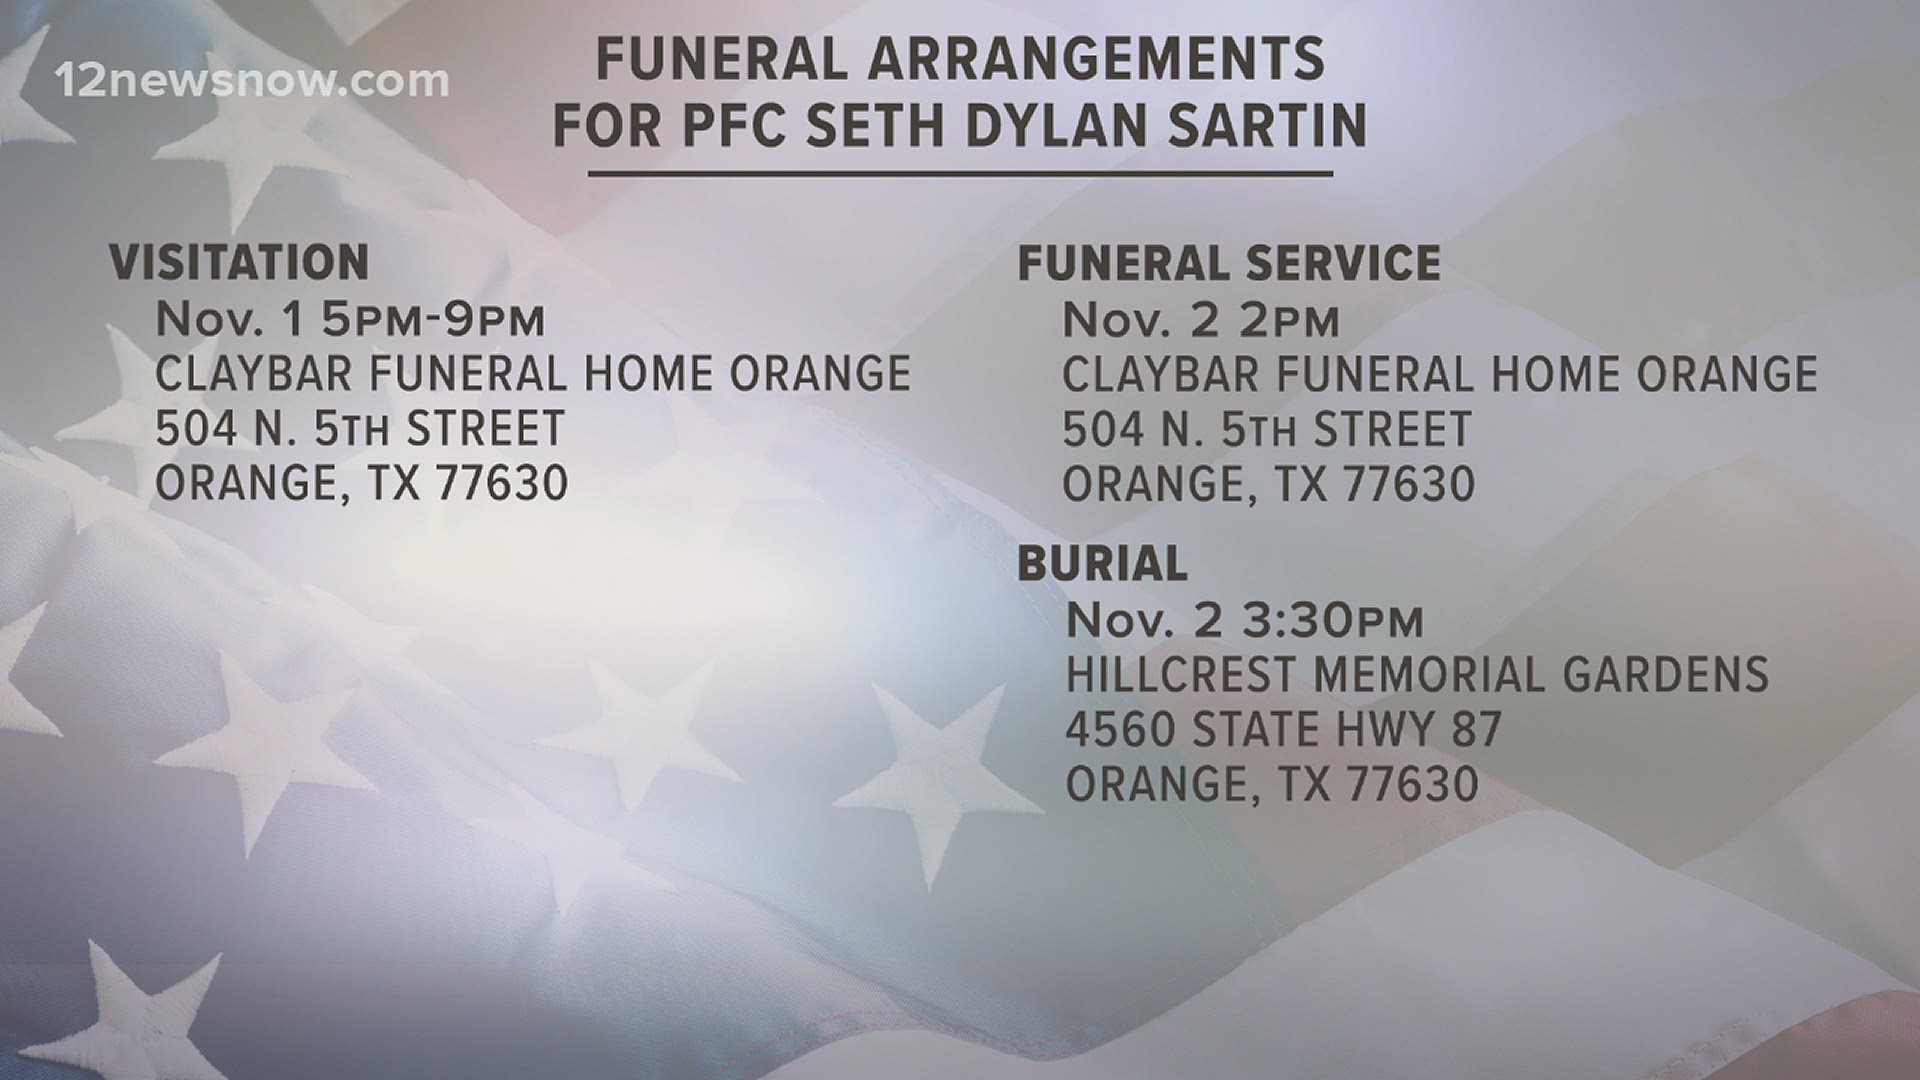 His family welcomes the SE Texas community to line the streets near Claybar funeral home Friday night, Oct. 30, at 8:30 p.m.